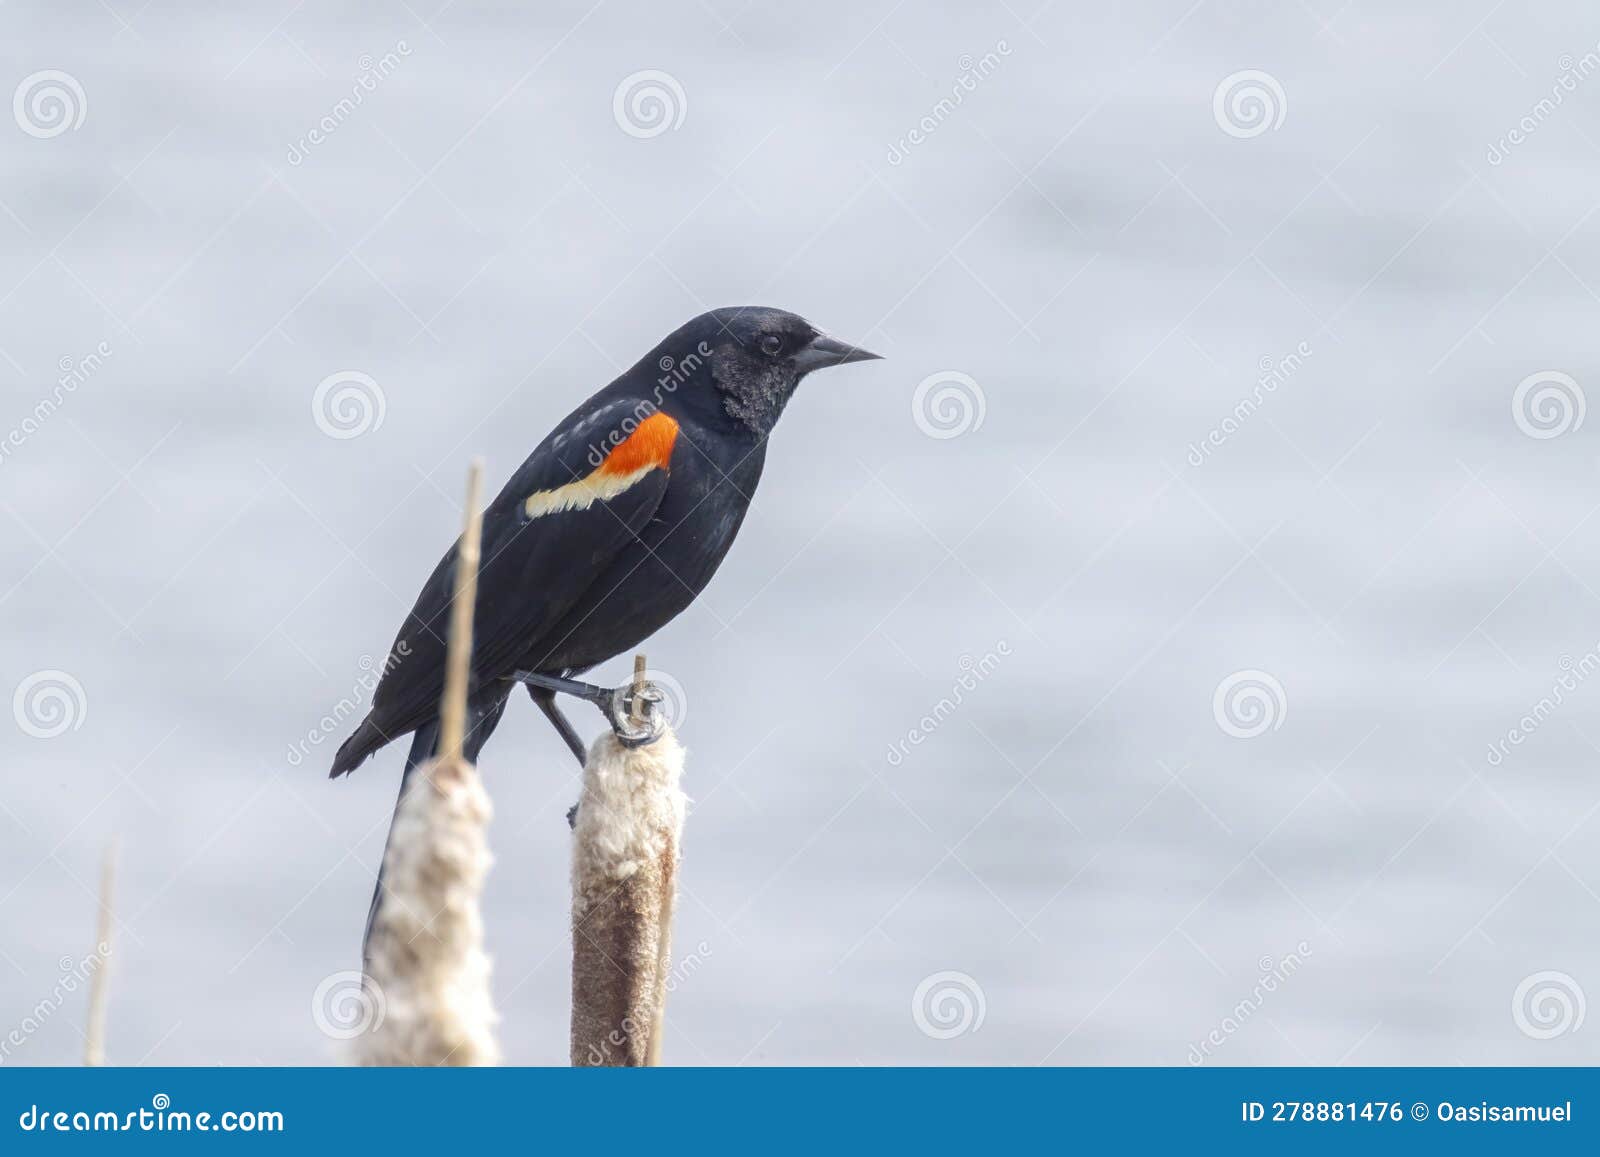 a male red-winged blackbird bird, a passerine bird of the family icteridae found in most of north america